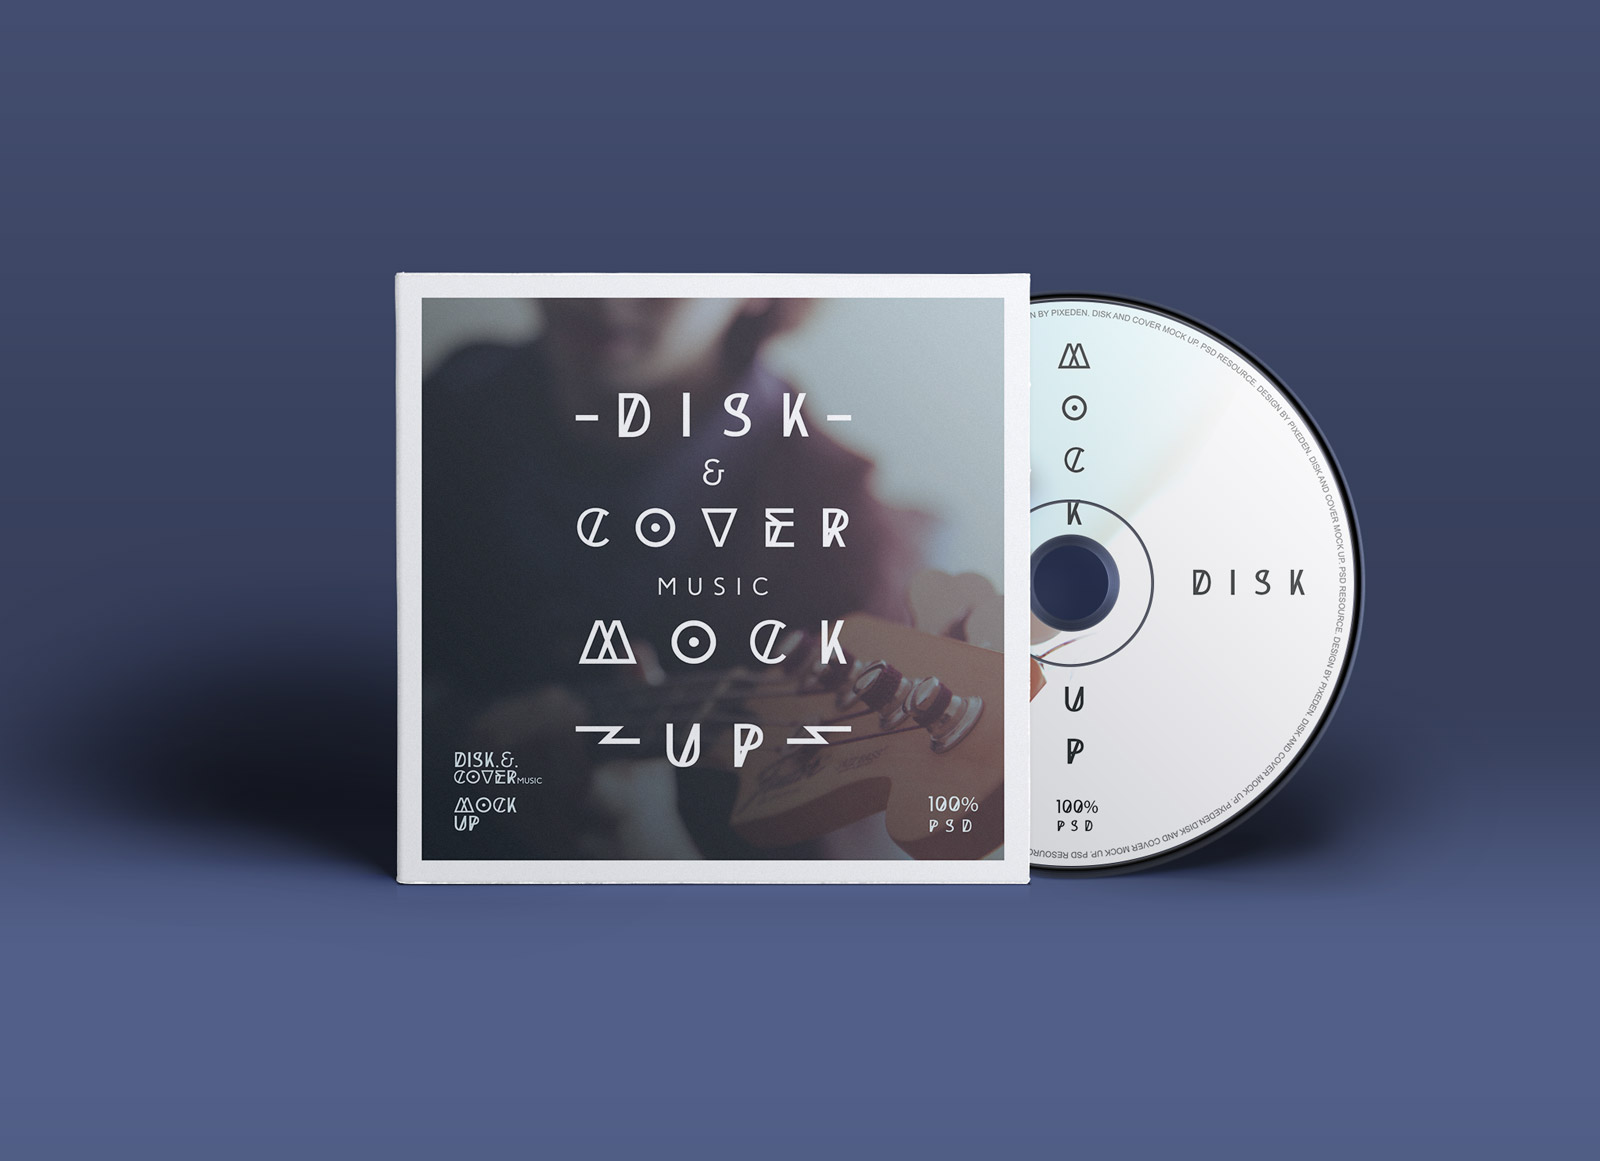 Free-CD-Disk-&-Album-Cover-Title-Mockup-PSD